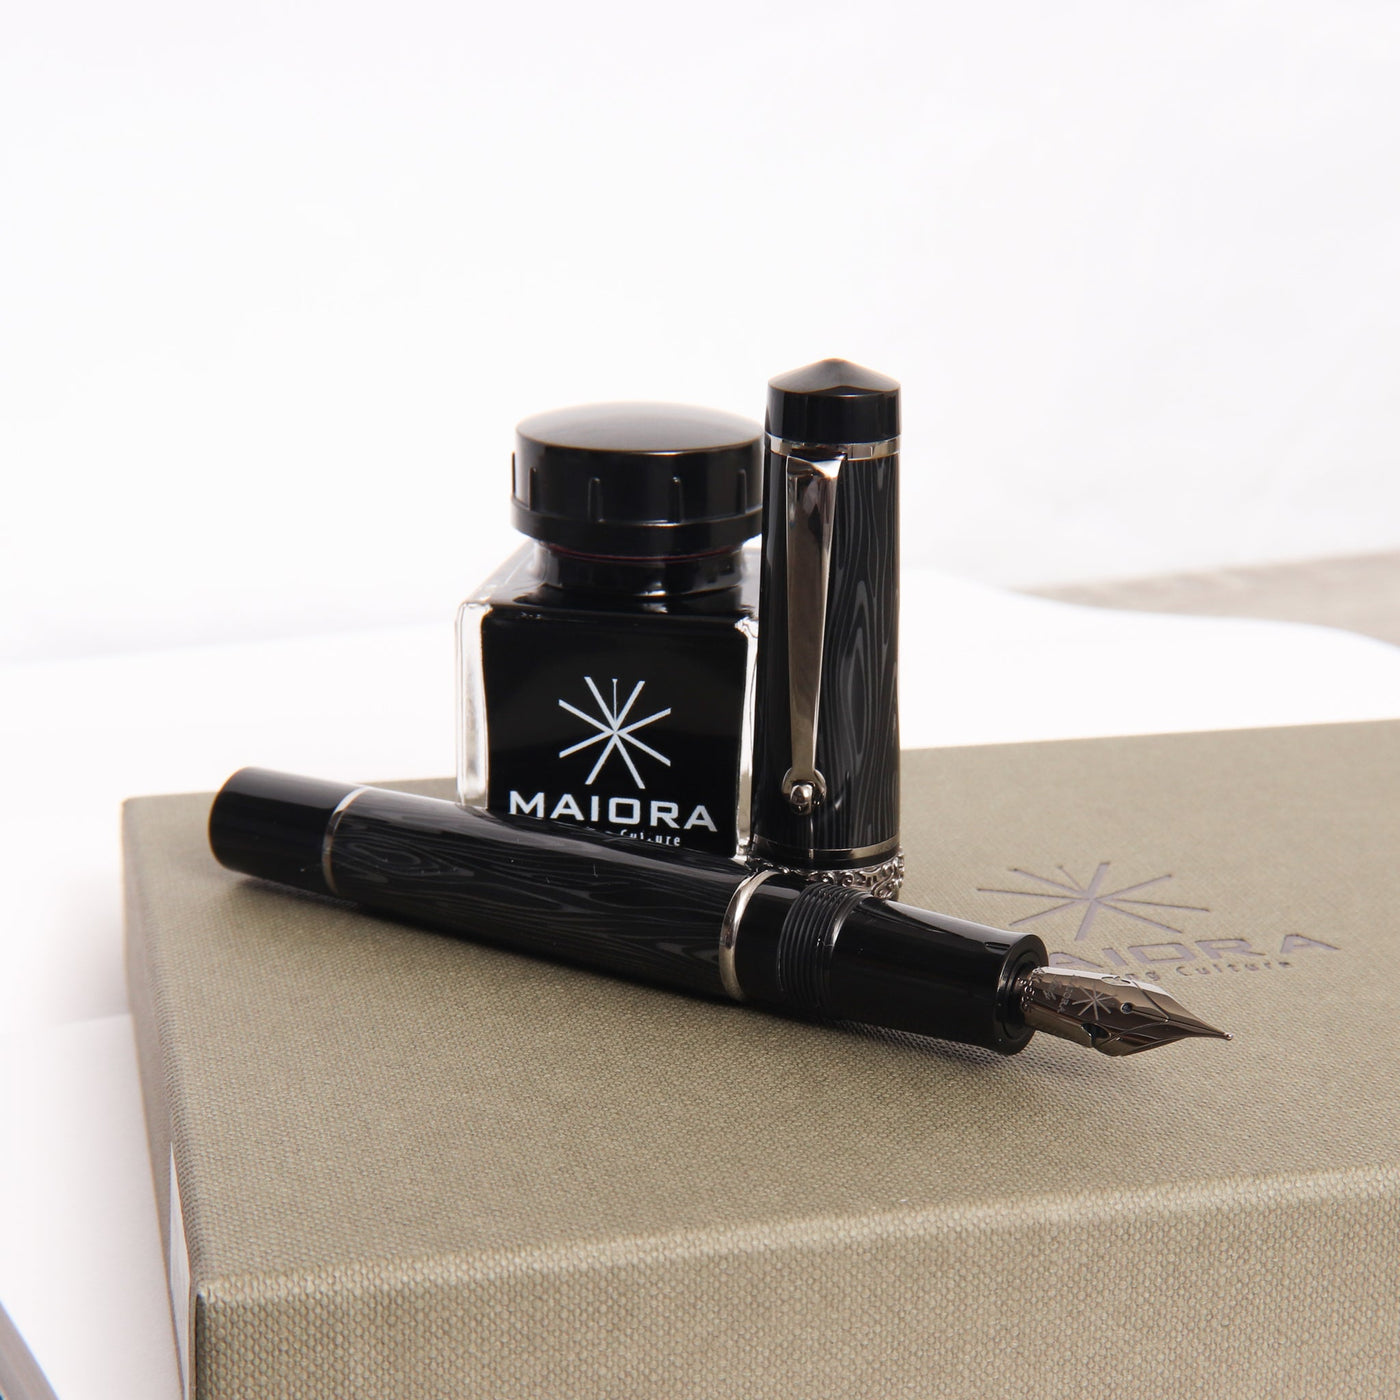 Maiora Foresta Nera Limited Edition 68 Fountain Pen Uncapped